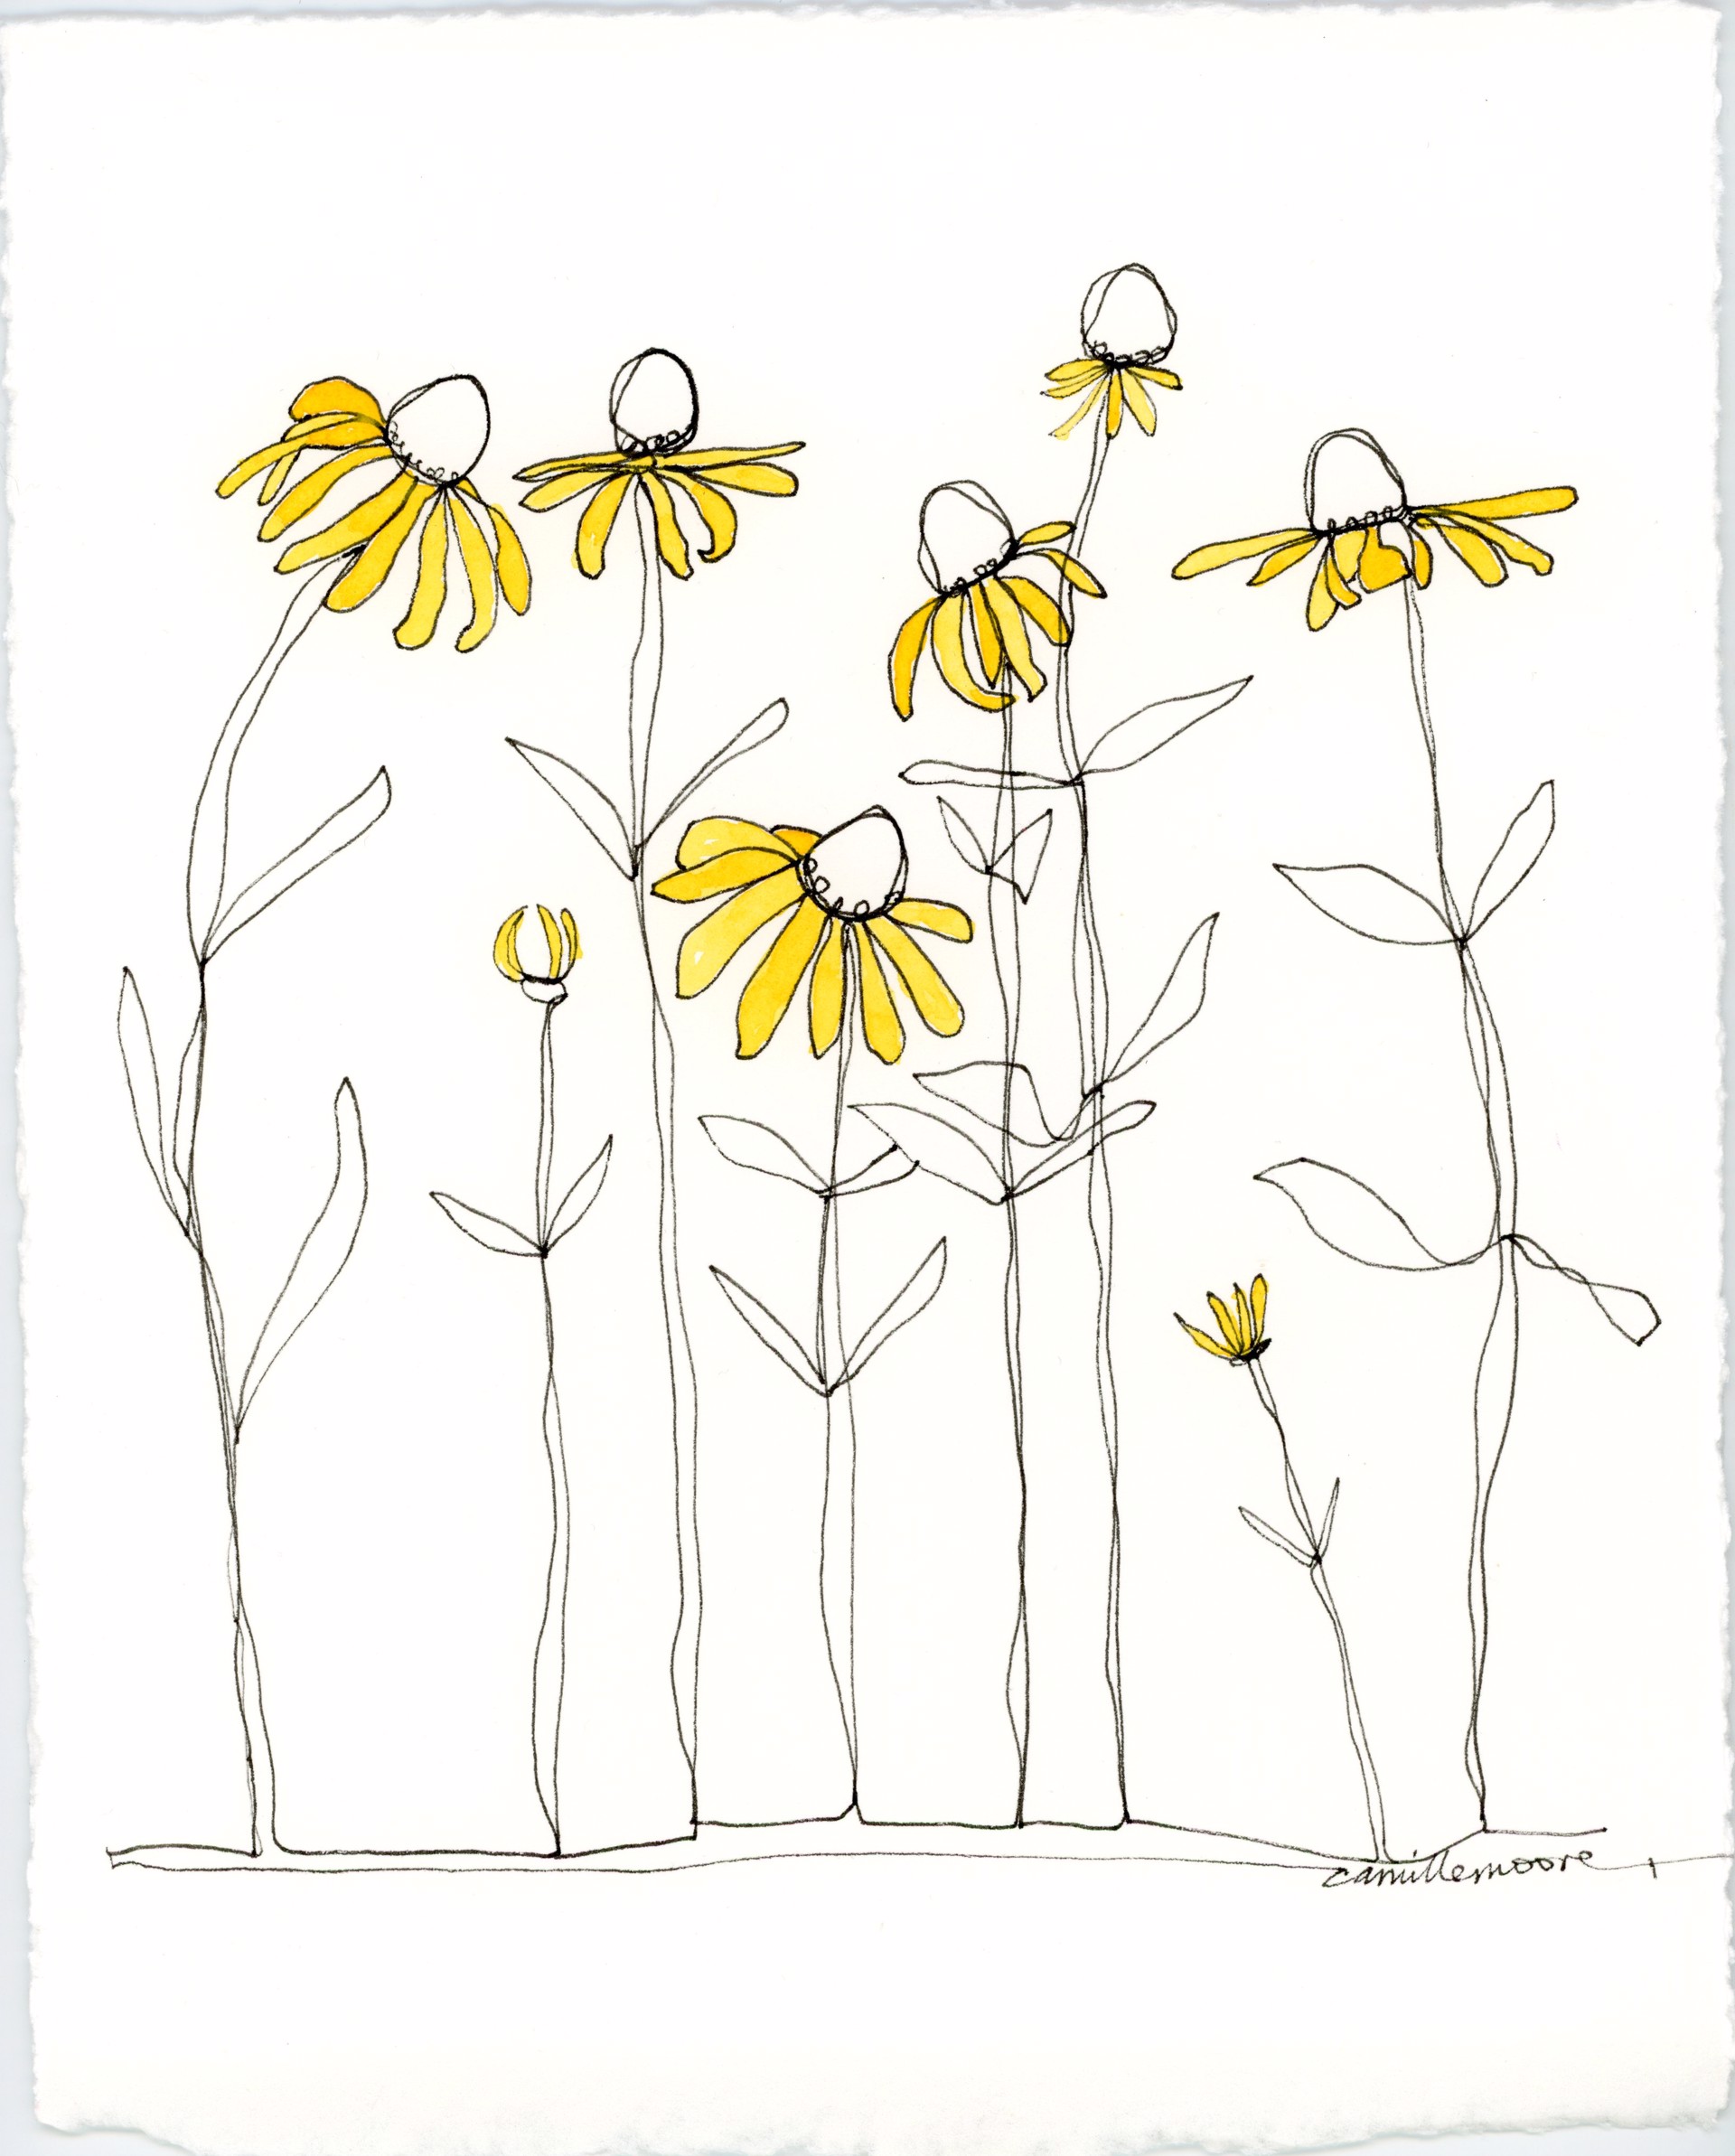 Black Eyed Susan by Camille Moore